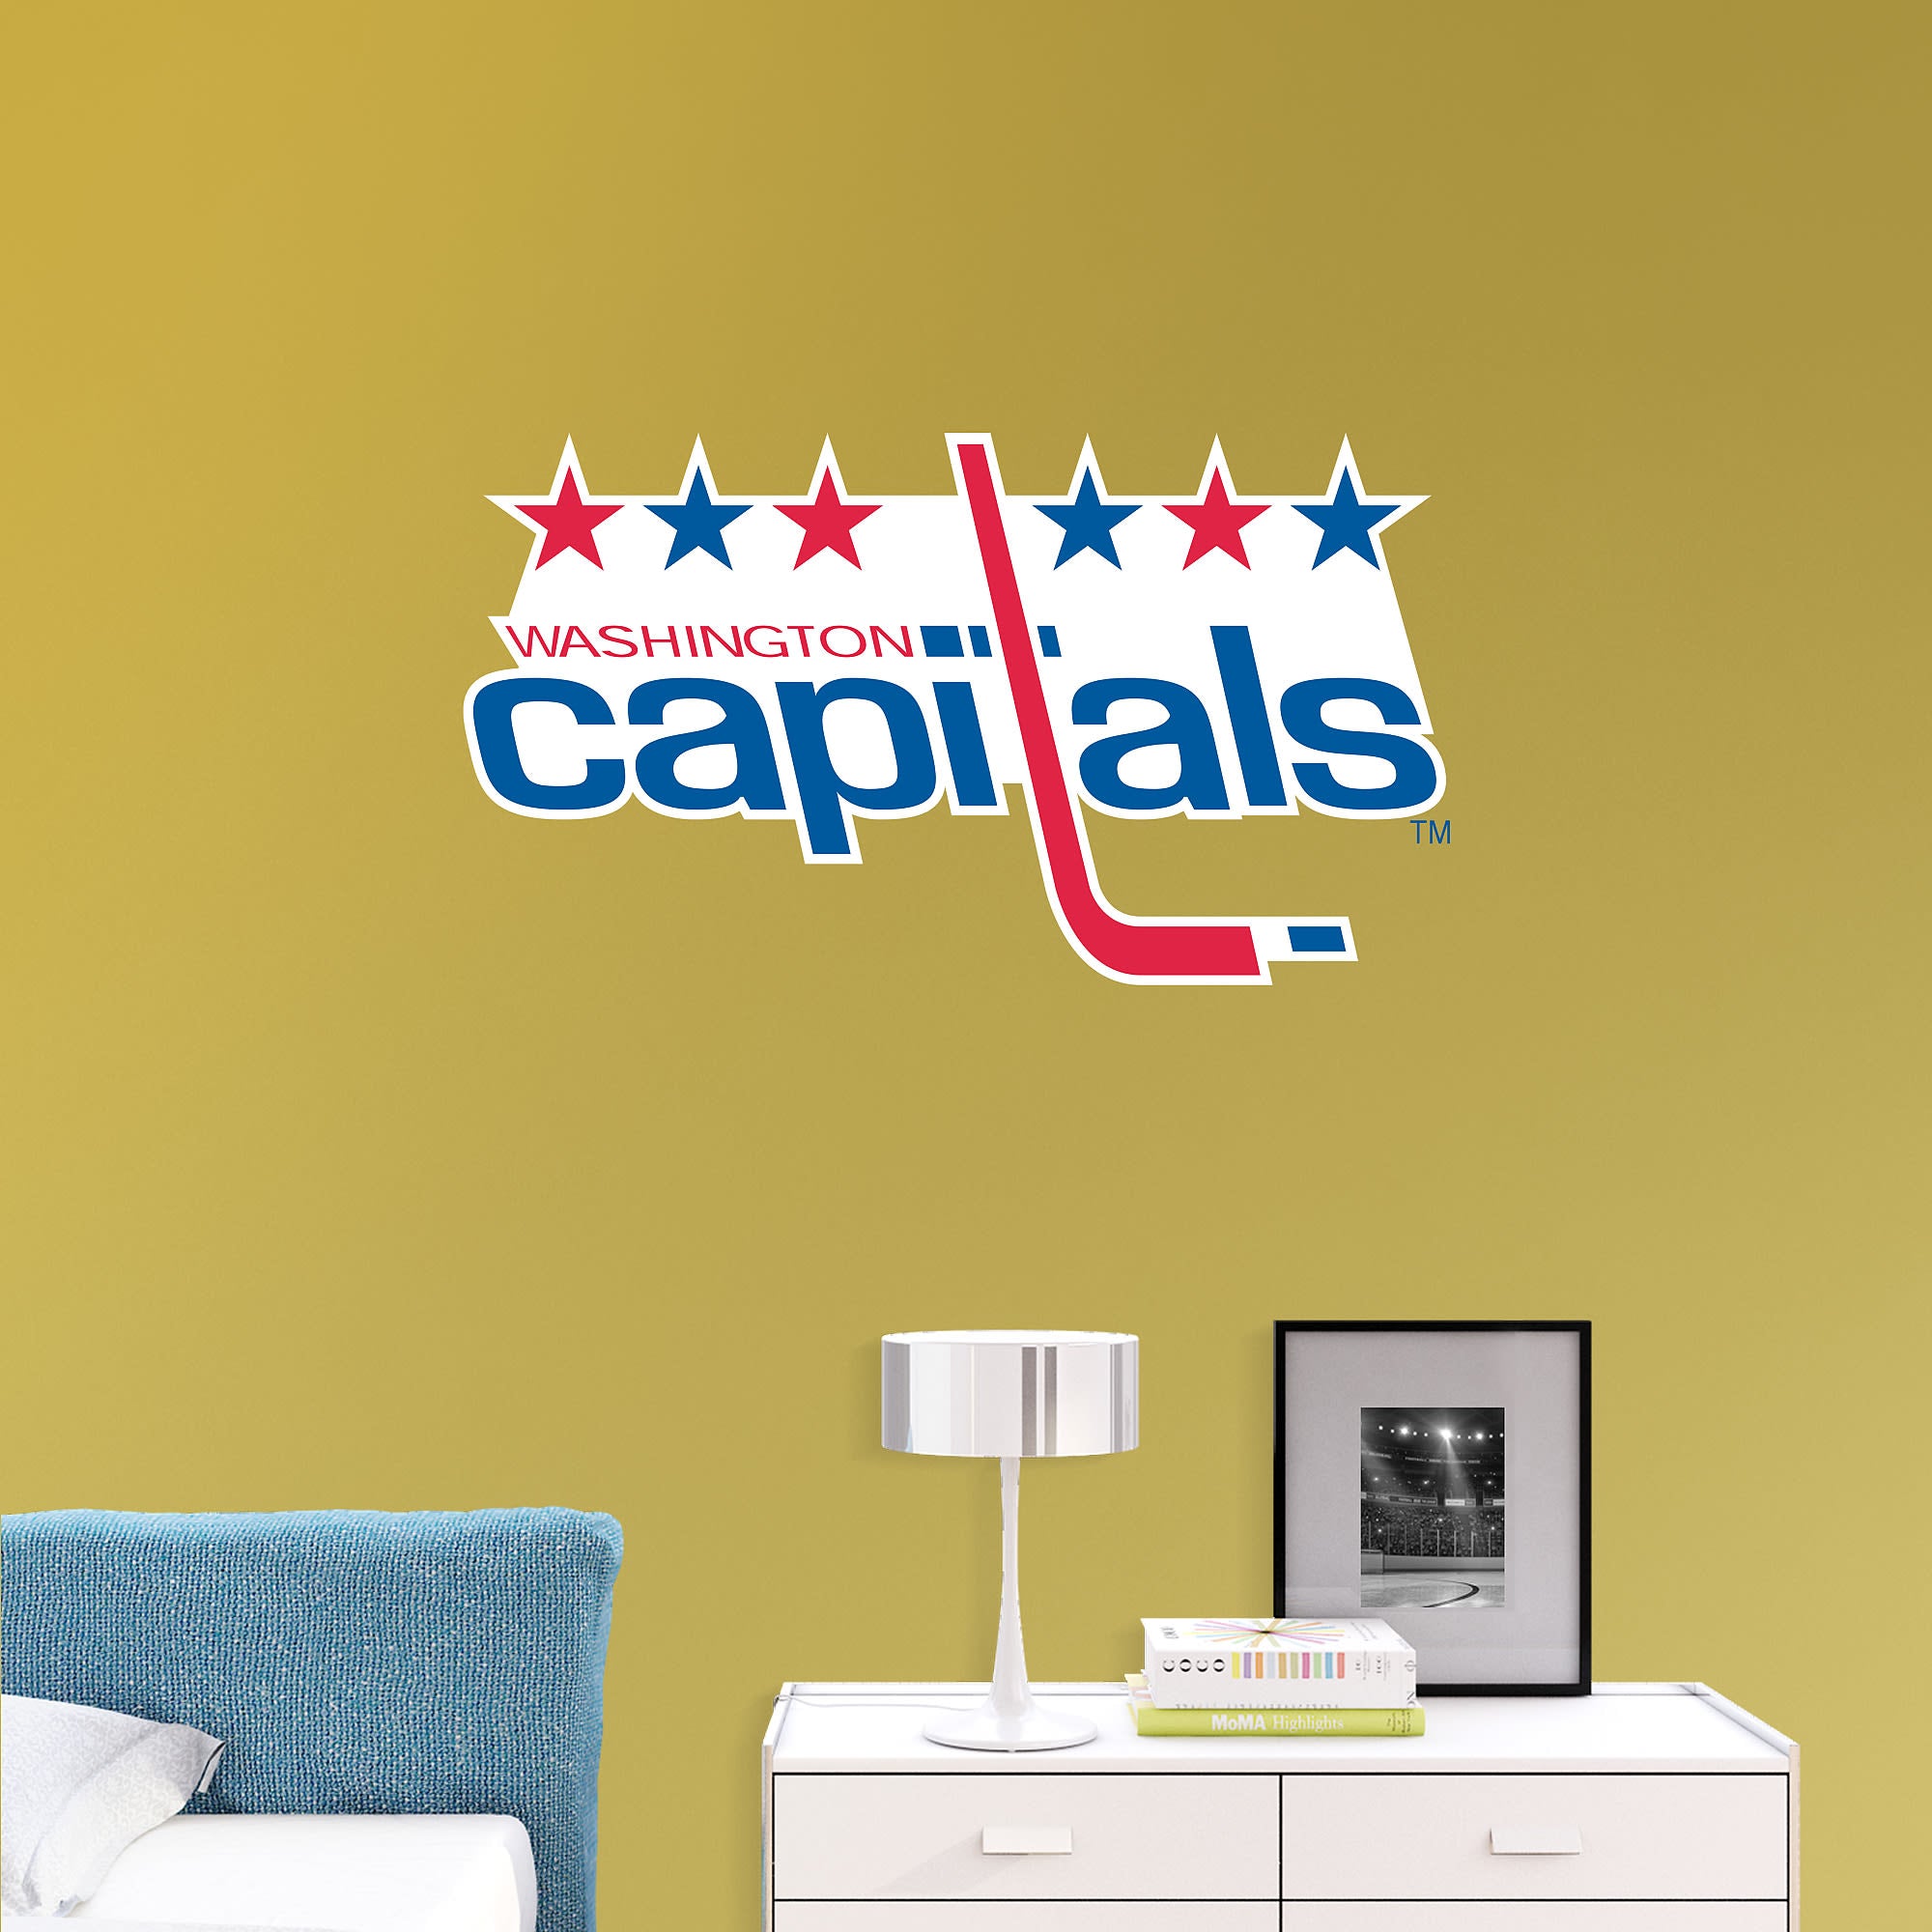 Washington Capitals: Vintage Logo - Officially Licensed NHL Removable Wall Decal 50.0"W x 28.0"H by Fathead | Vinyl